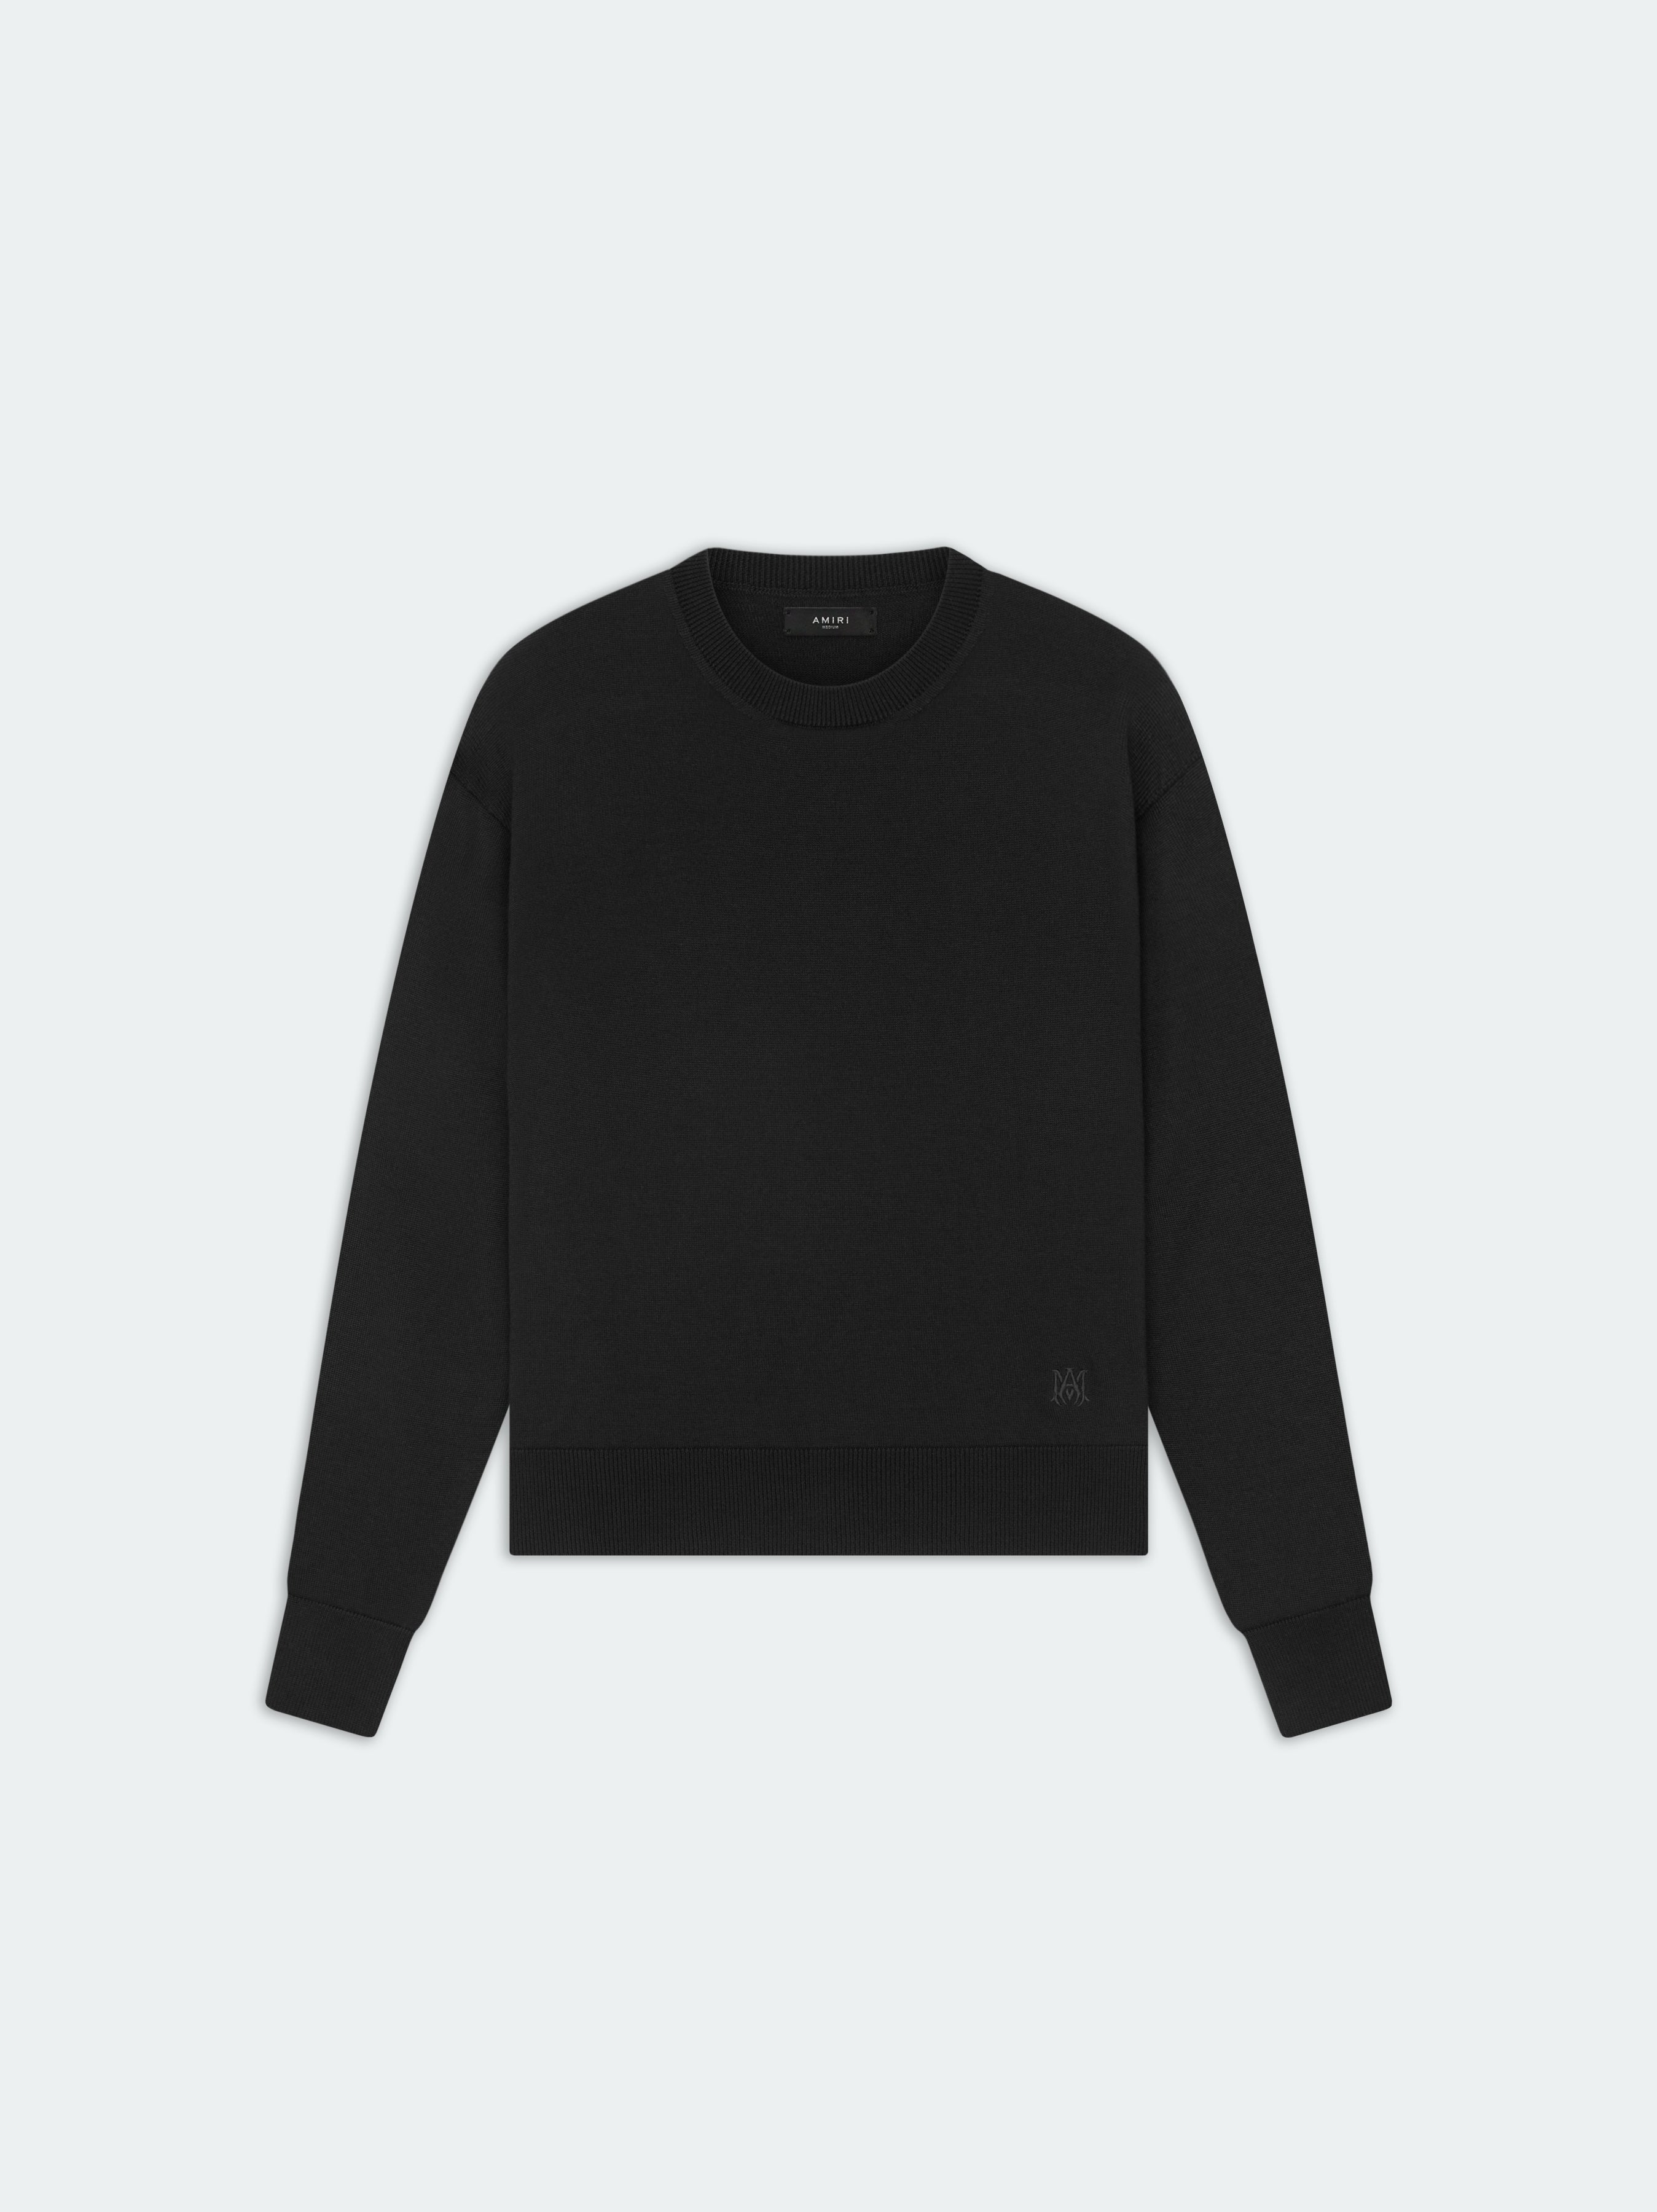 Product LONG SLEEVE CREW-BLACK featured image